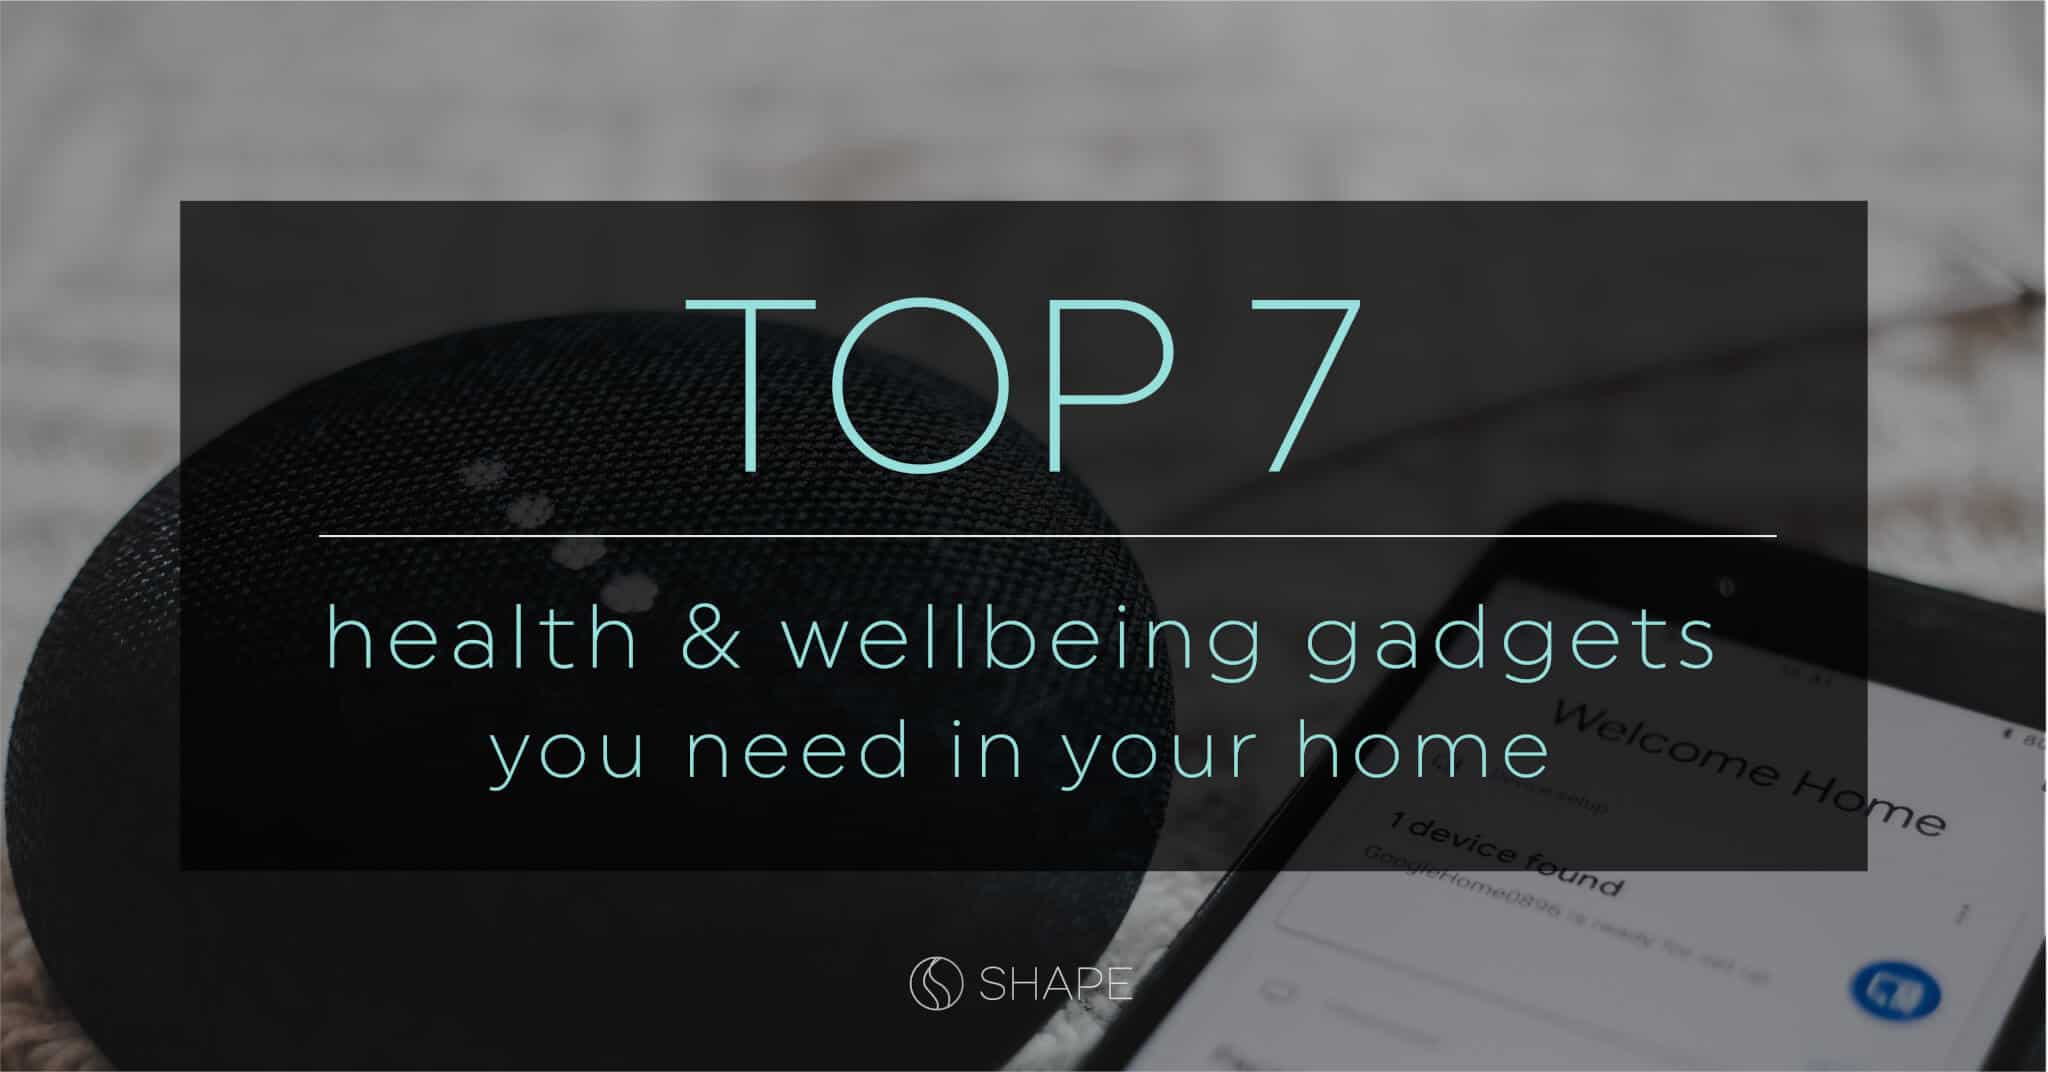 These offbeat wellness gadgets make taking care of your health fun